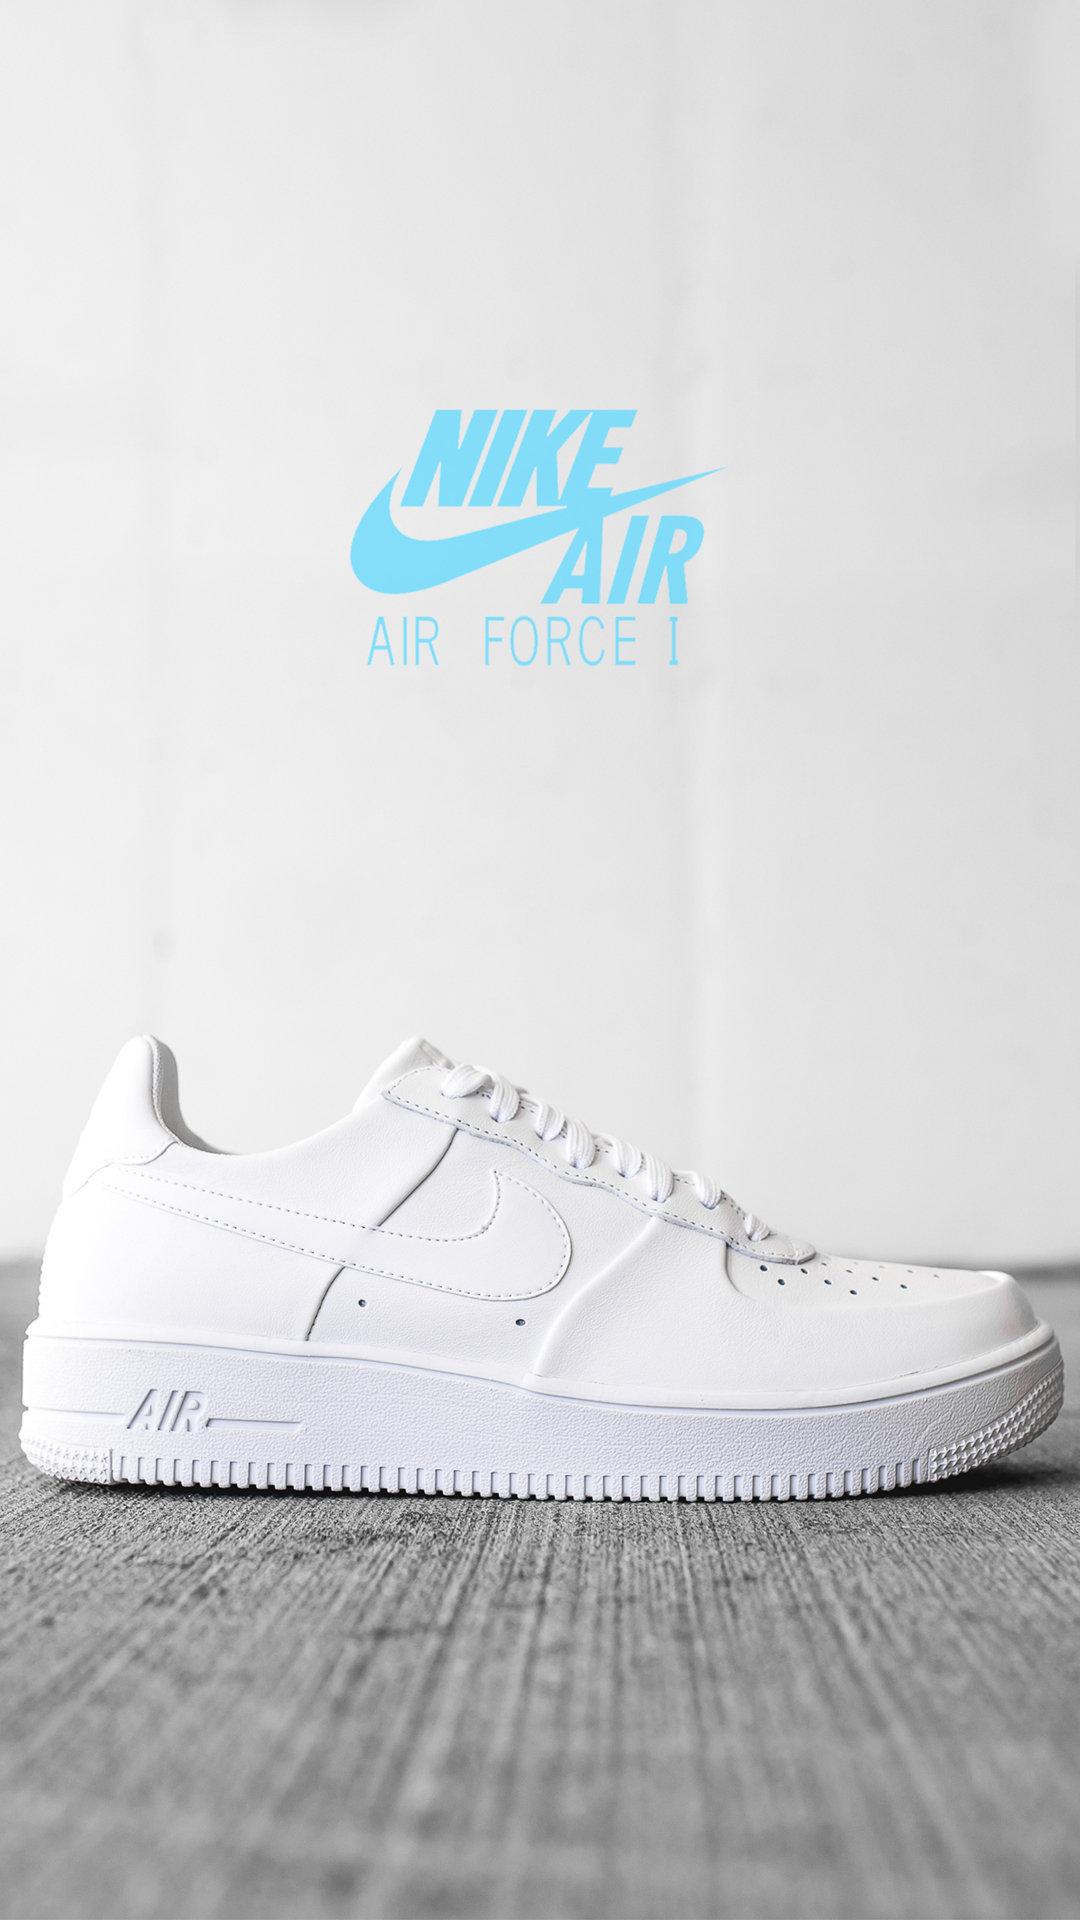 Nike Air Force 1 Shoes Wallpapers